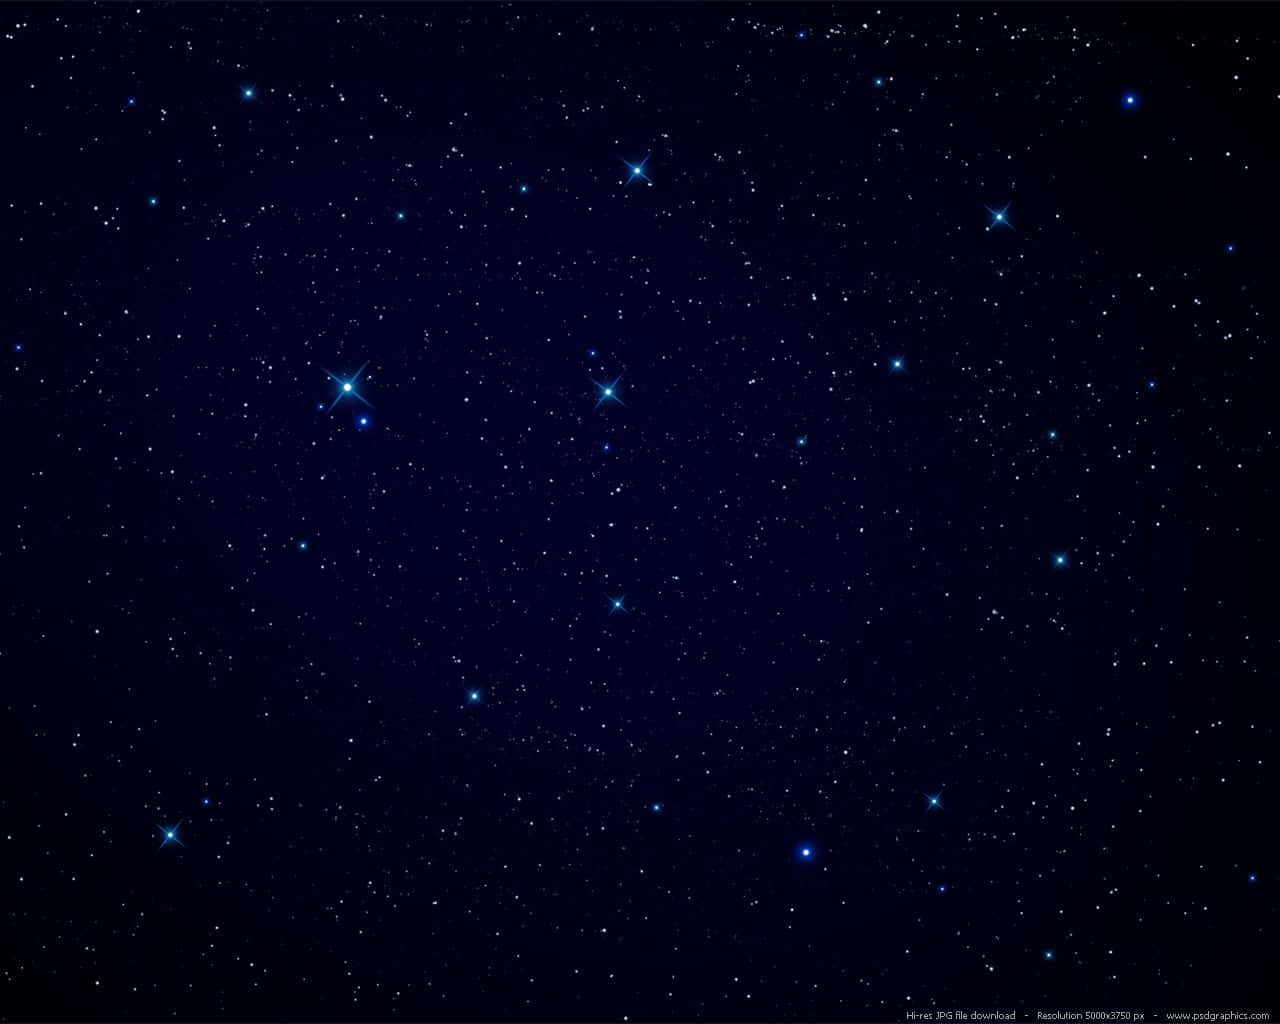 Shining brightly in the night sky, these four bright Blue Stars light up the night. Wallpaper